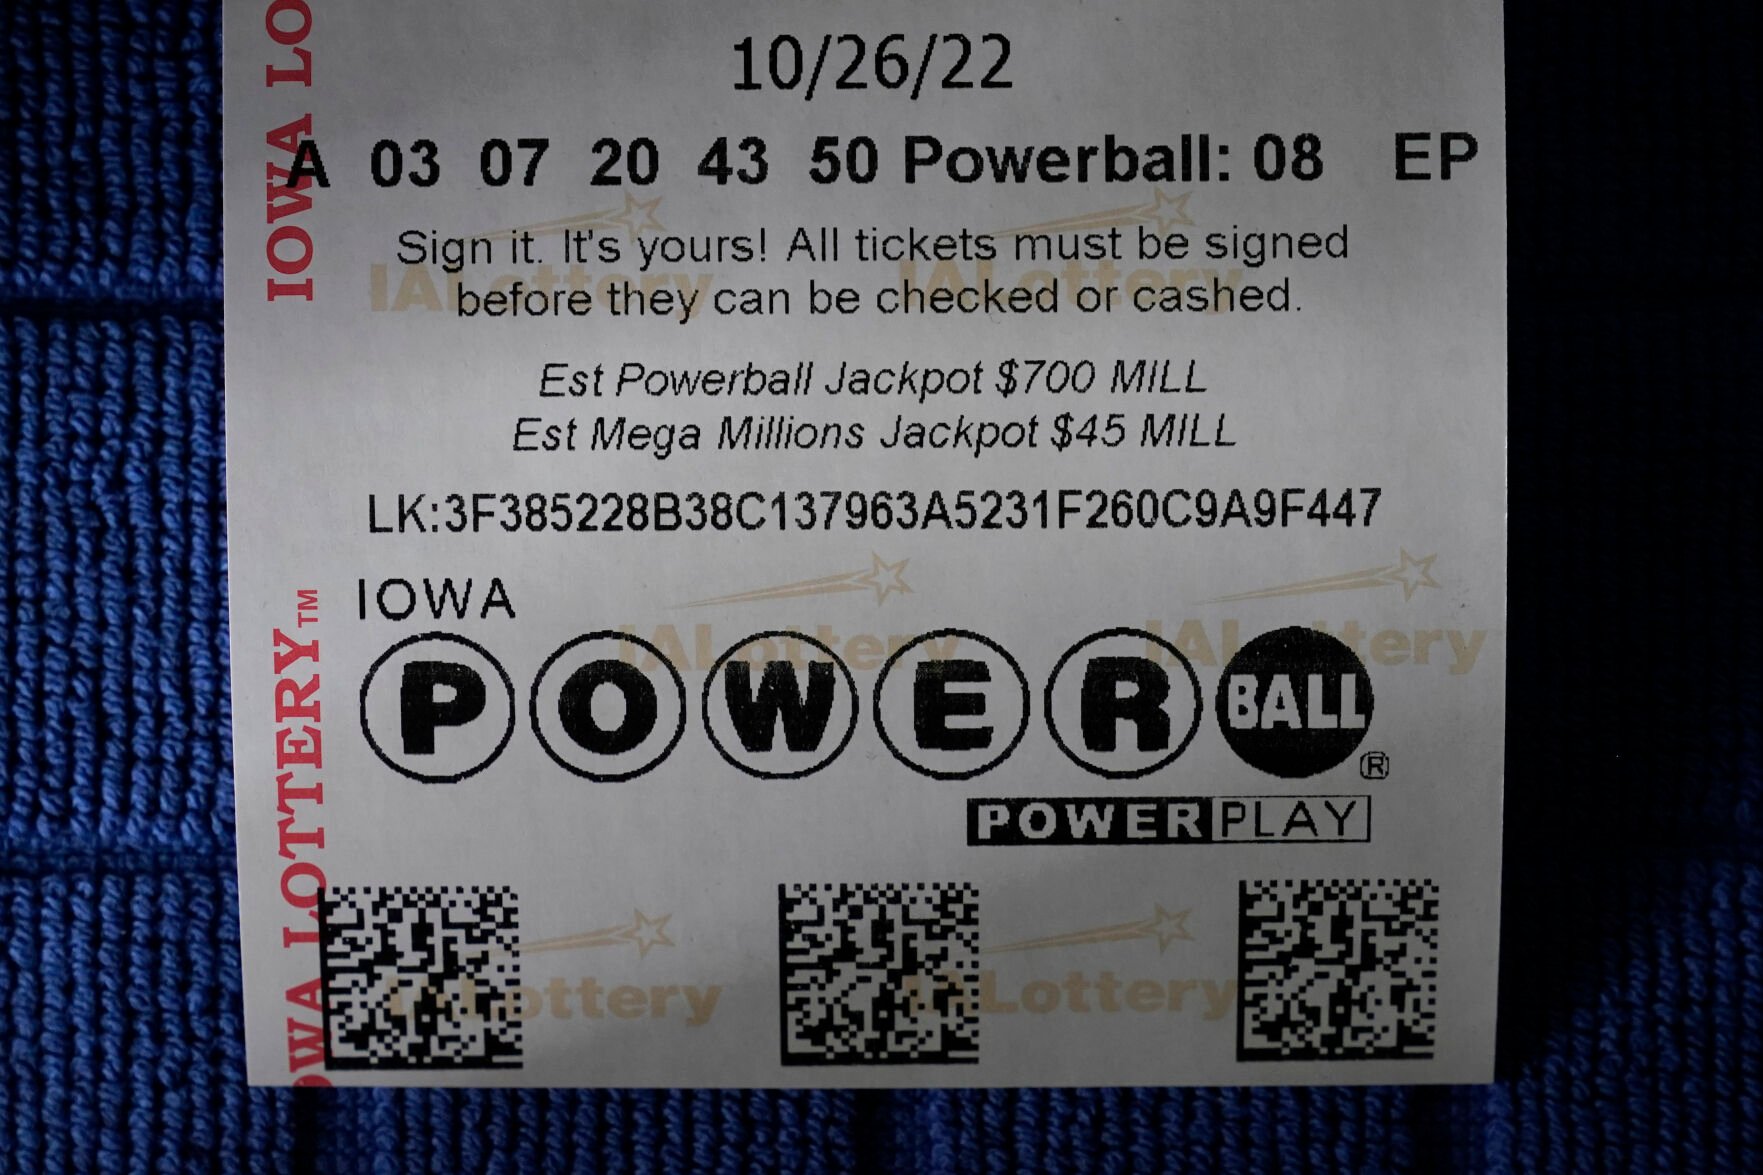 <p>A Powerball ticket showing the estimated jackpot of $700 million is displayed, Tuesday, Oct. 25, 2022, in Urbandale, Iowa. The eighth-largest lottery jackpot will be up for grabs Wednesday night when numbers are drawn for an estimated $700 million Powerball grand prize. (AP Photo/Charlie Neibergall)</p>   PHOTO CREDIT: Charlie Neibergall